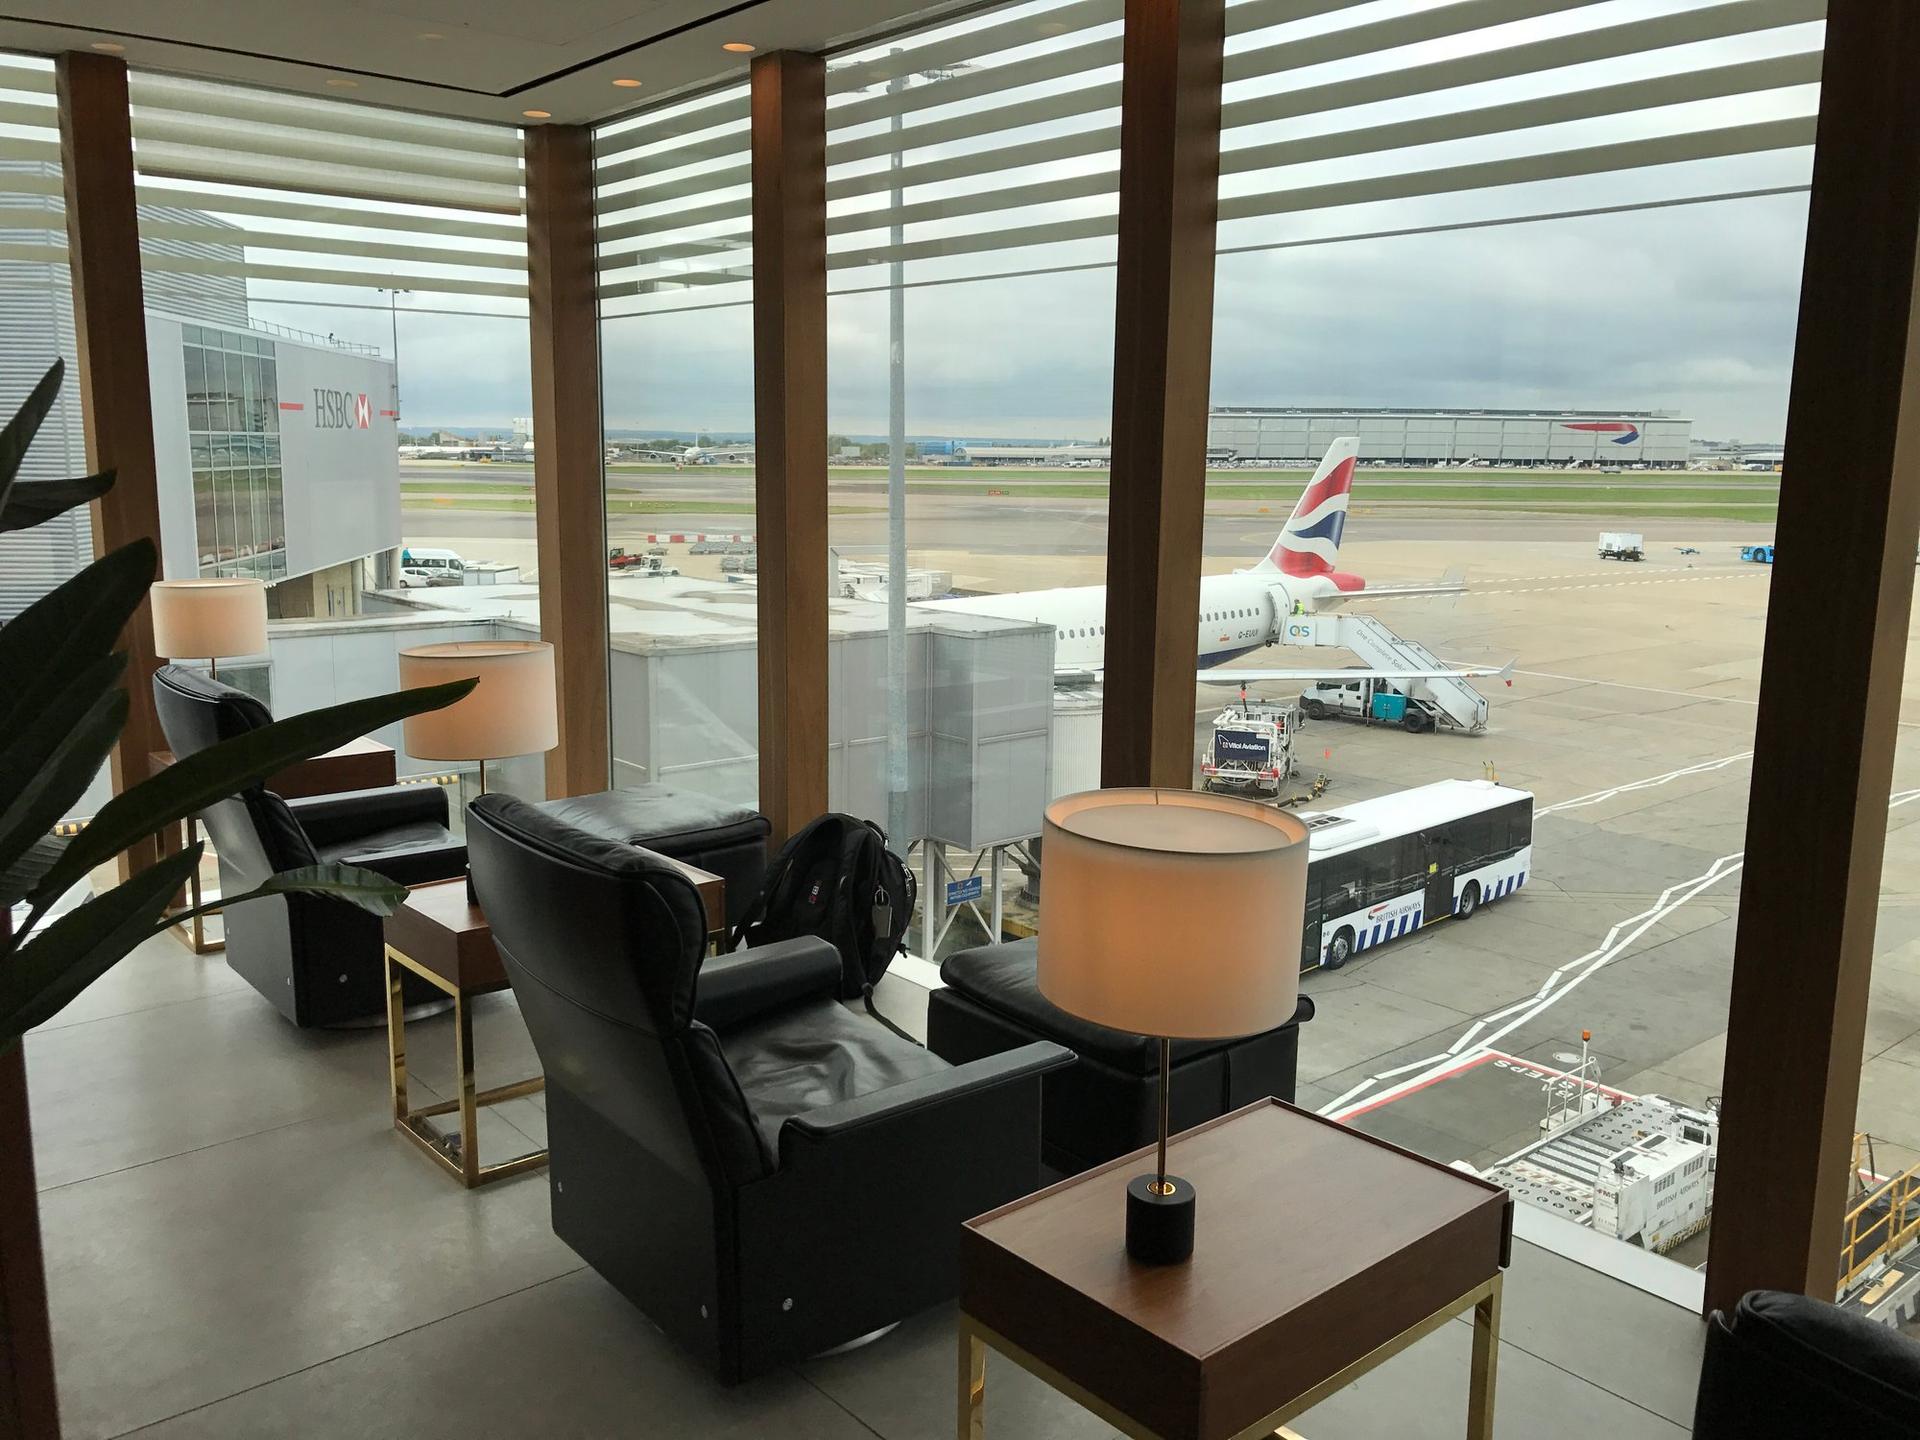 Cathay Pacific First Class Lounge image 4 of 17